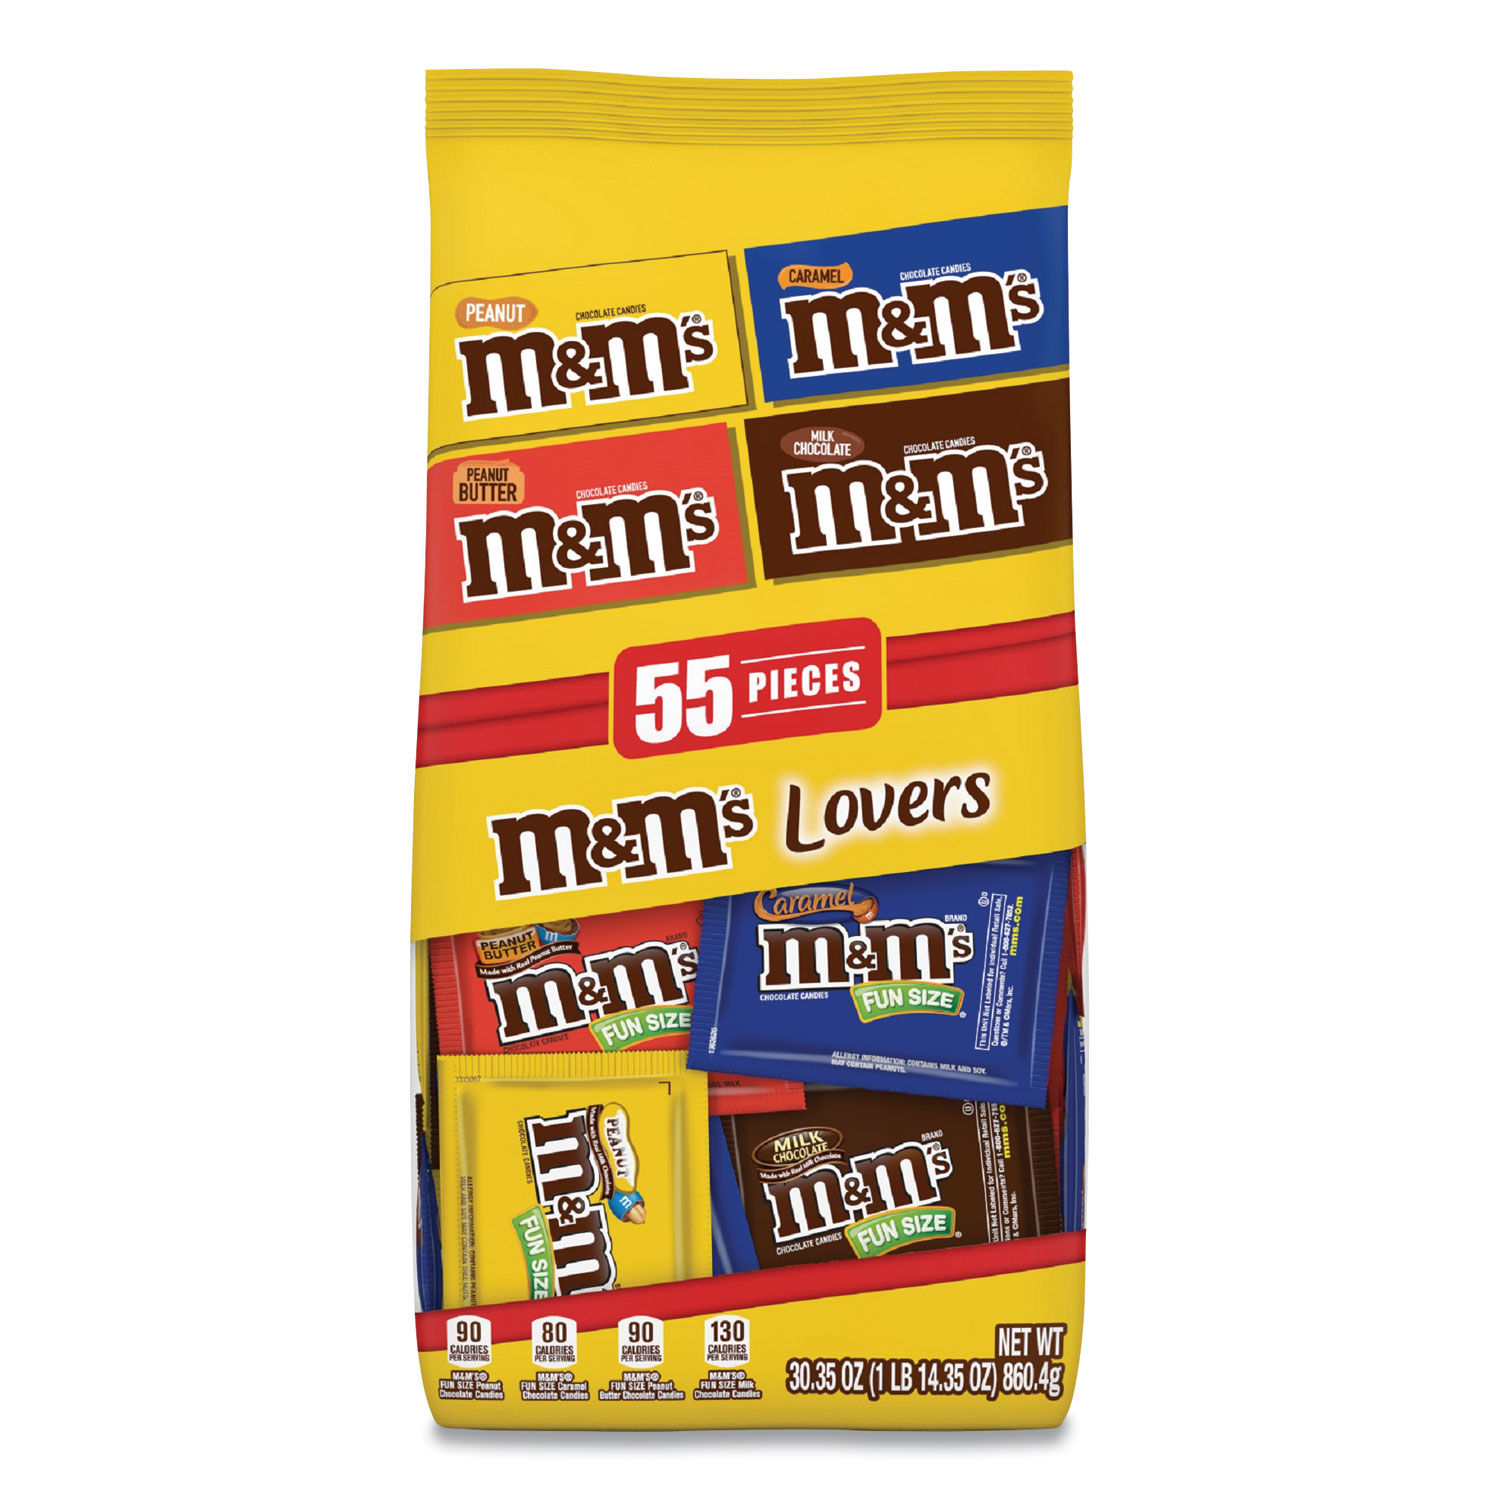 M&M's Party Size Candy Bag, Caramel Chocolate, 38